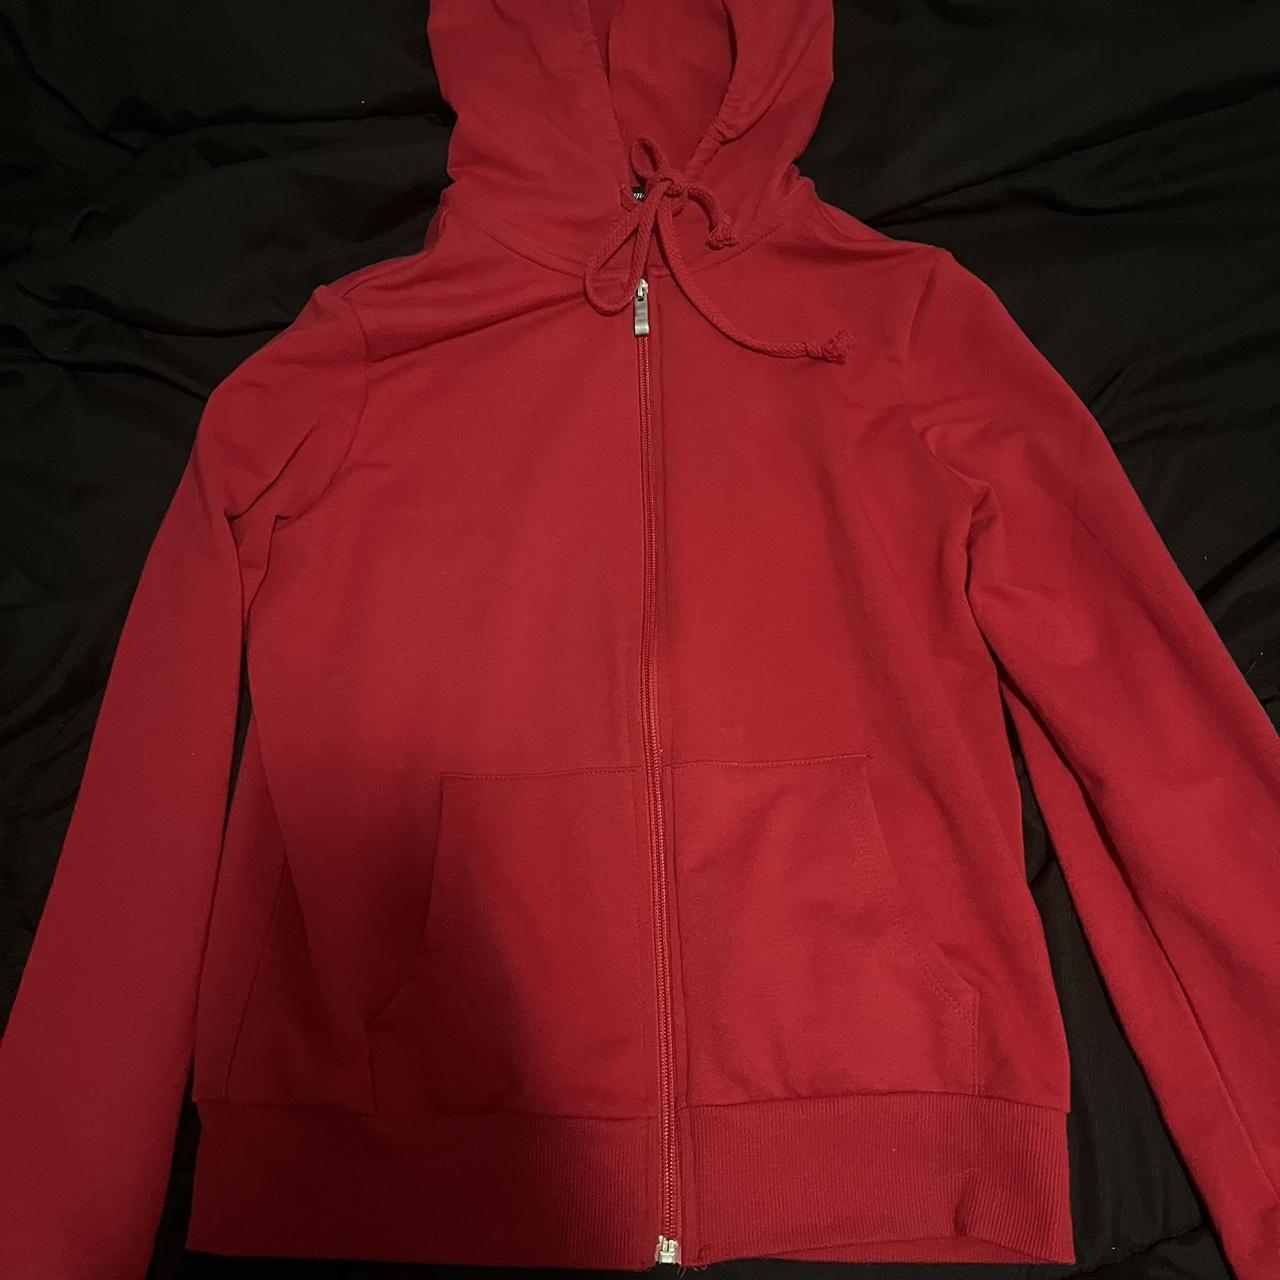 red zip up jacket 🌿 size:s depop payments only! - Depop